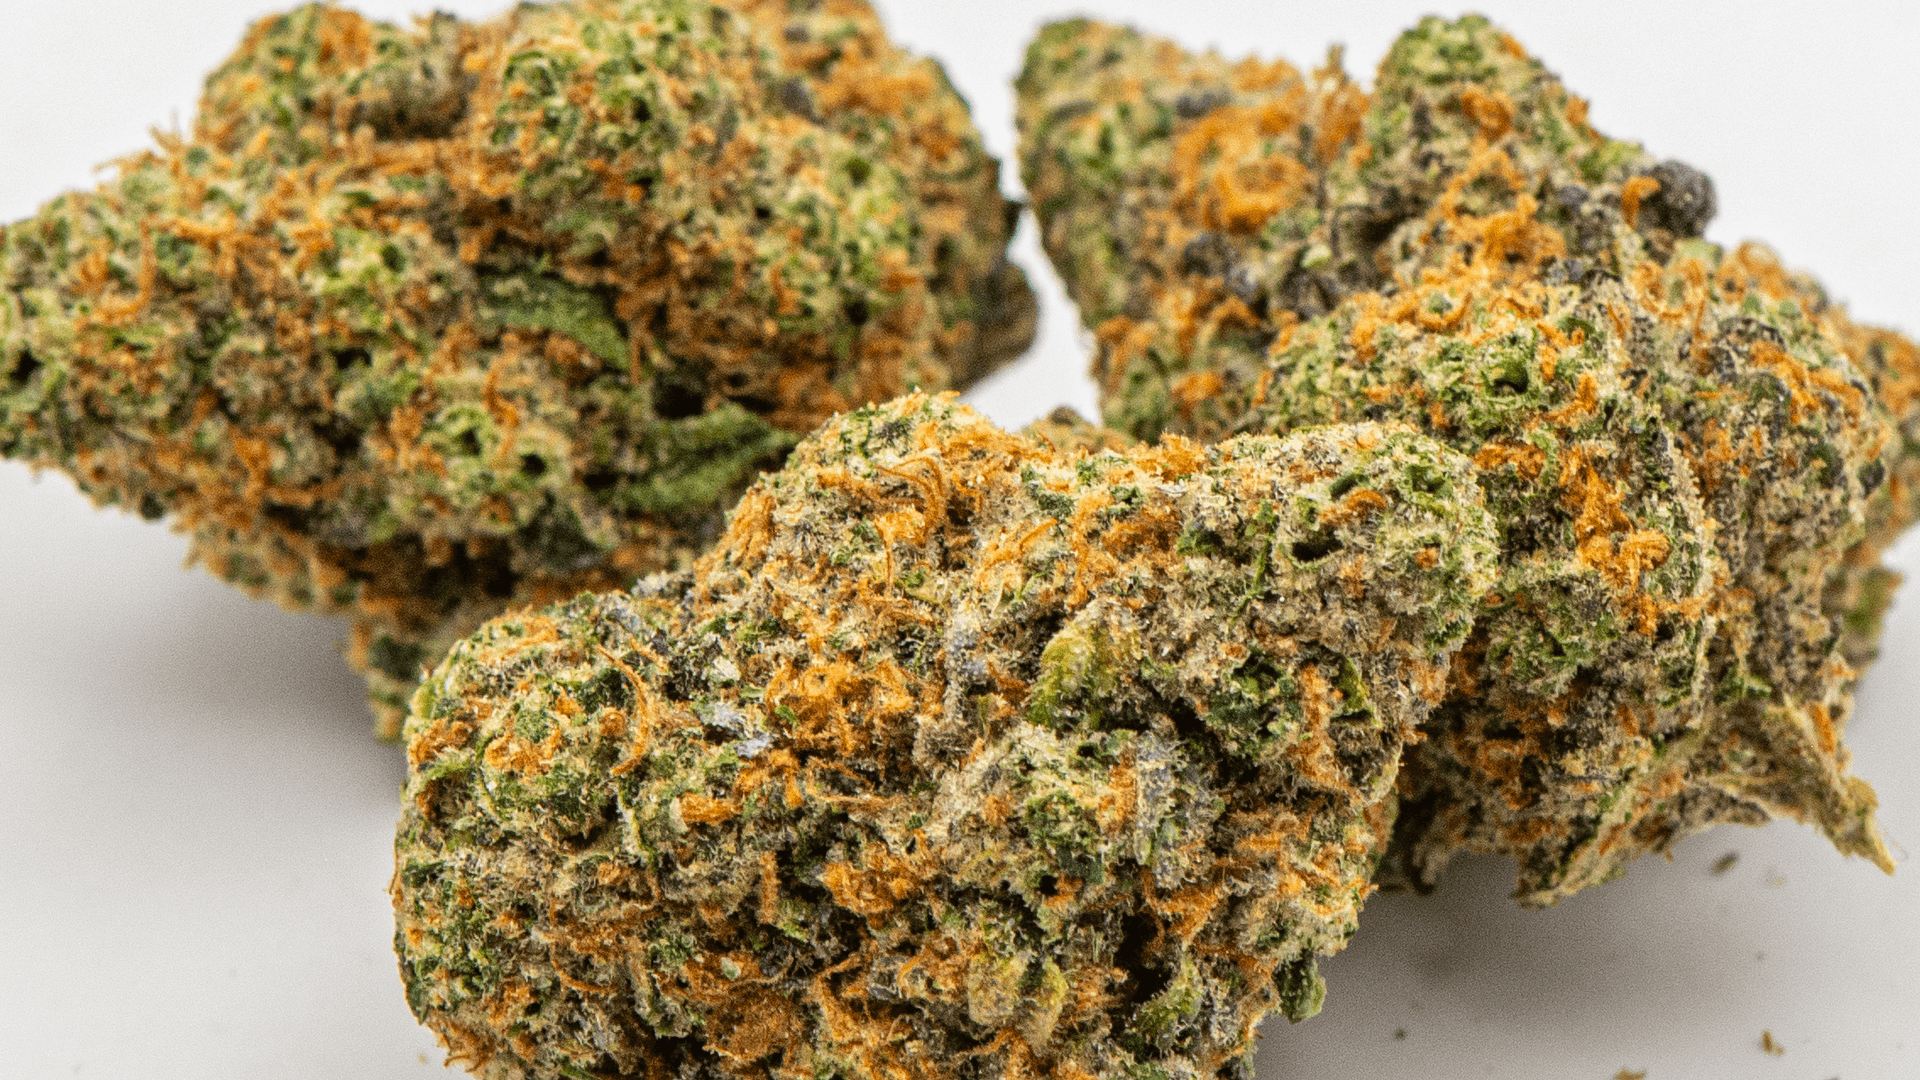 Top Shelf Flower and More at The Cannabis Depot